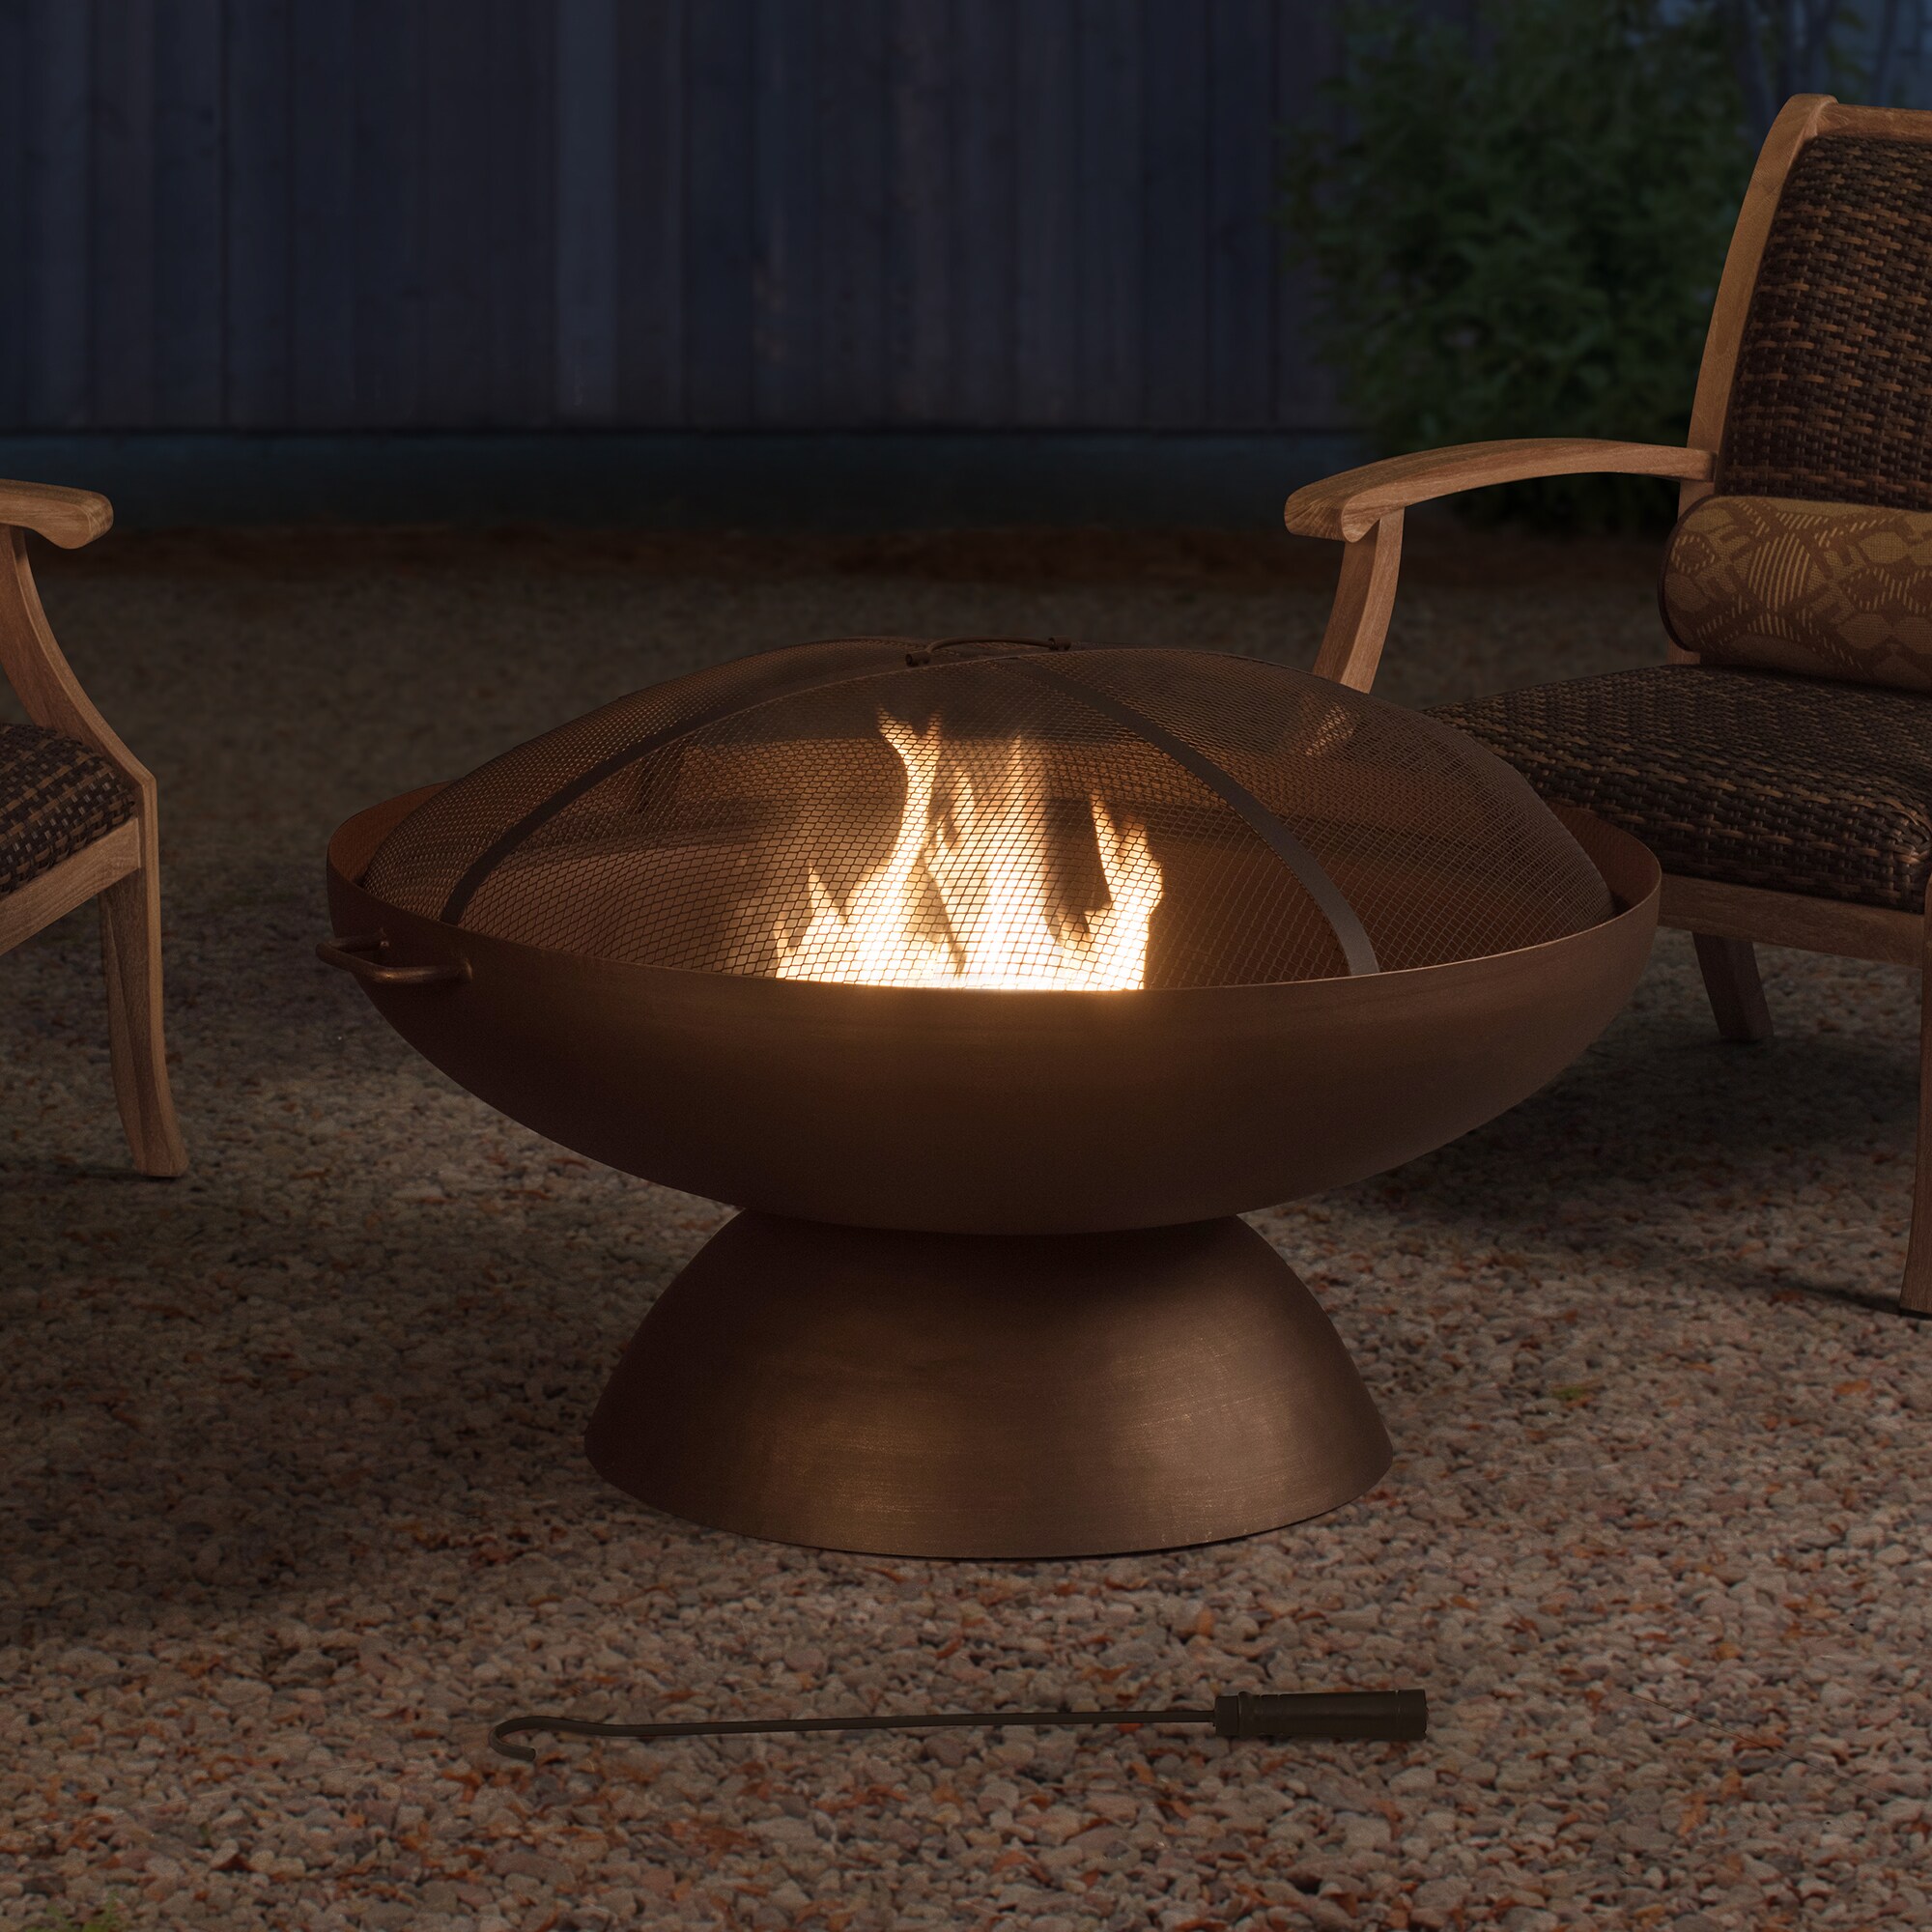 In Dennison Wood Burning Fire Pit, Large Wood Burning Fire Pit